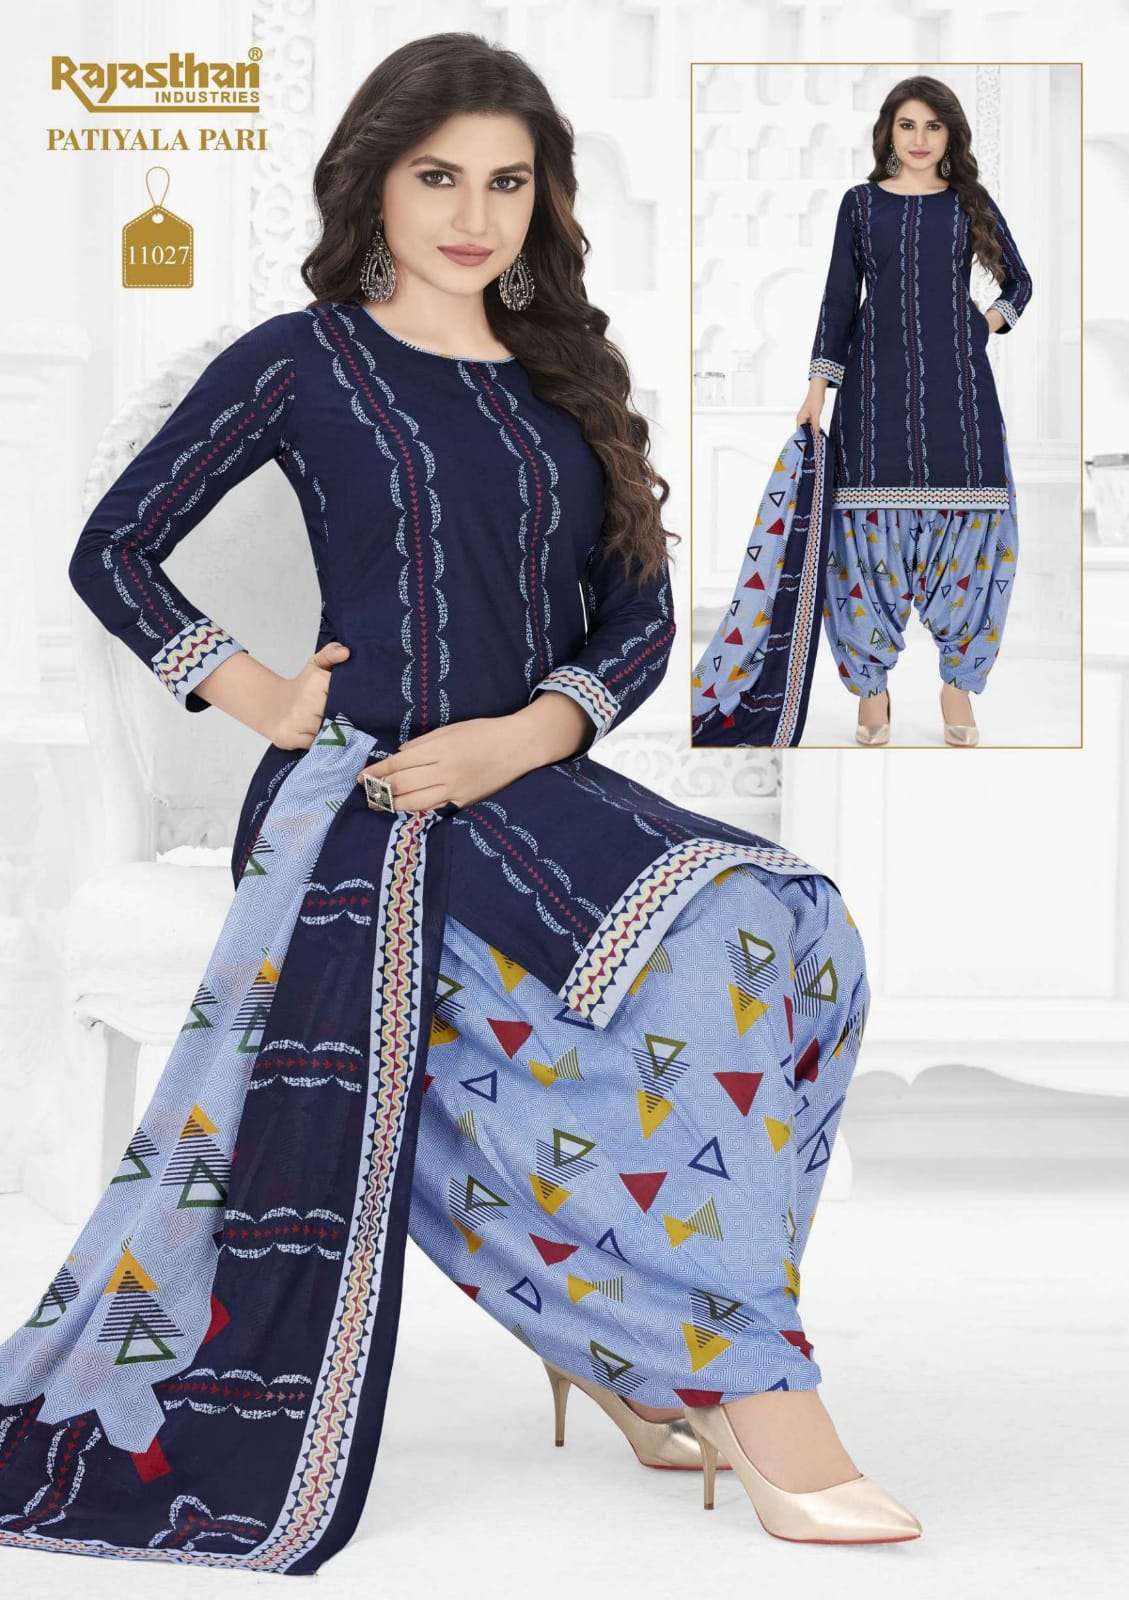 Patiyala Pari Vol 11 By Rajasthan Readymade Cotton Daily Wear Collection Wholesale Online Supplier Cotton Salwar Suit Catalog